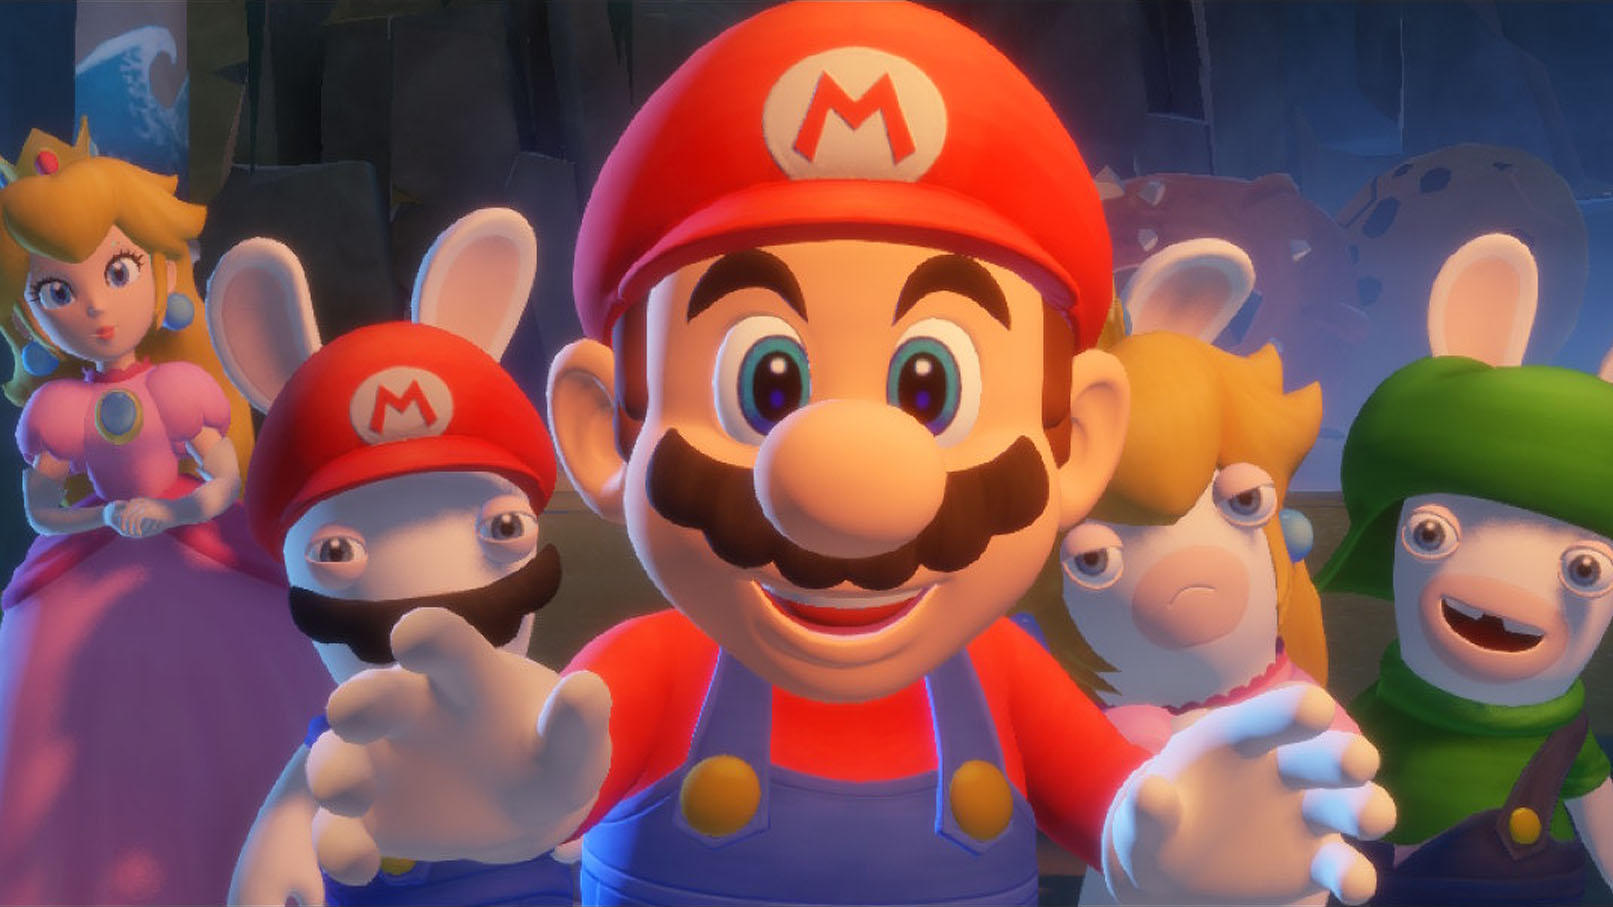 Mario + Rabbids Sparks of Hope: Mario and friends